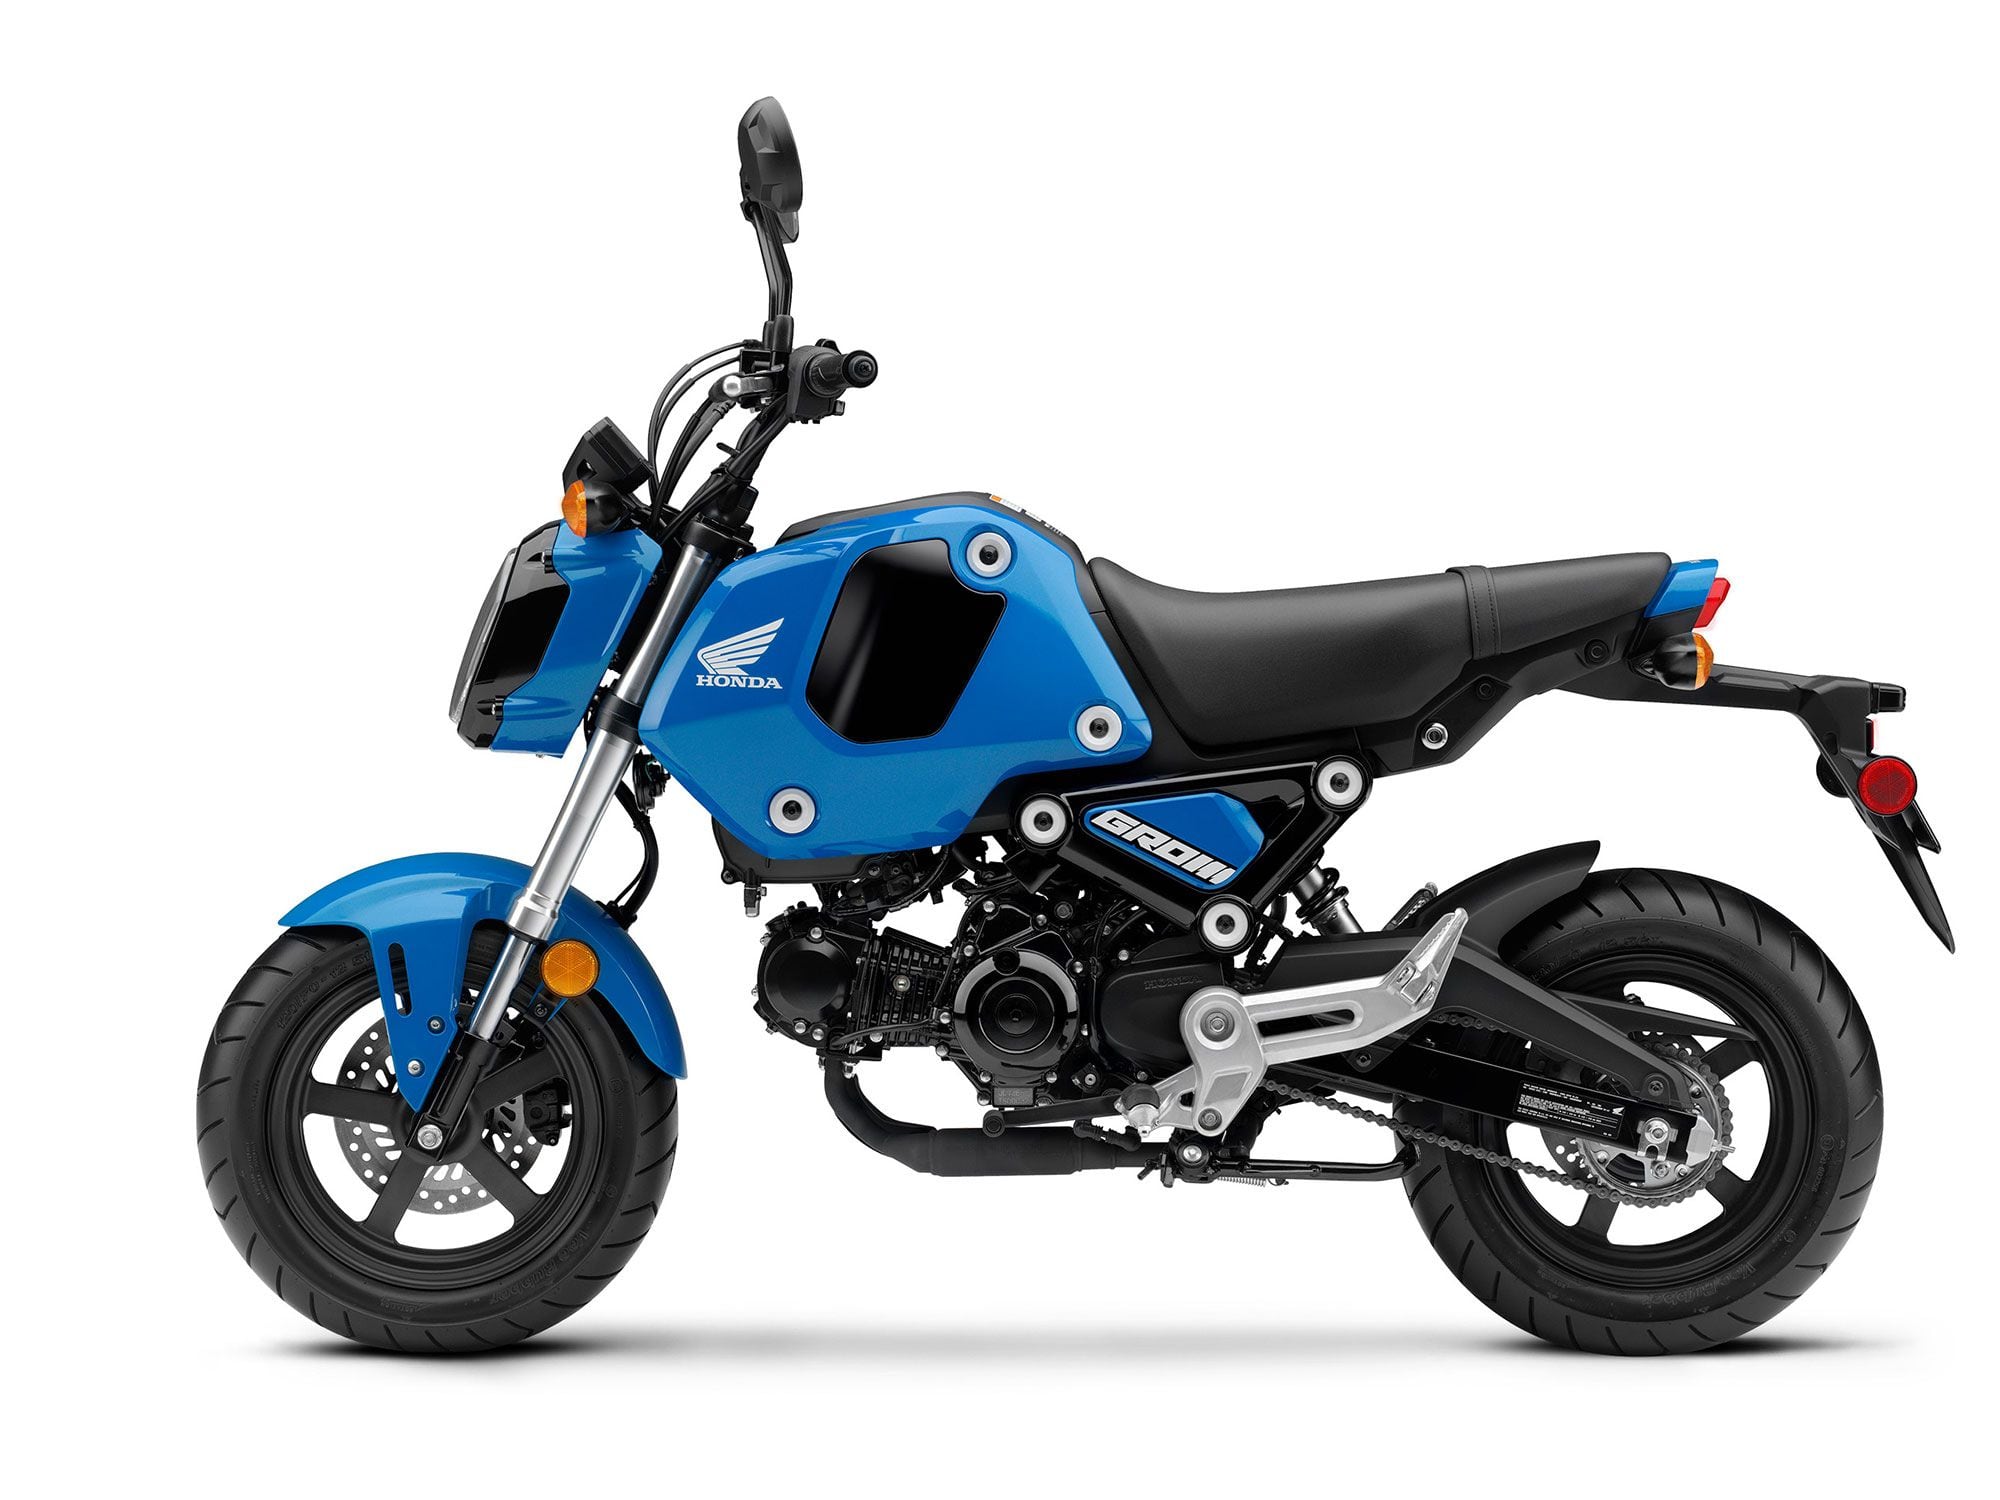 The 2022 Grom gets a fifth gear and updated instrument panel.